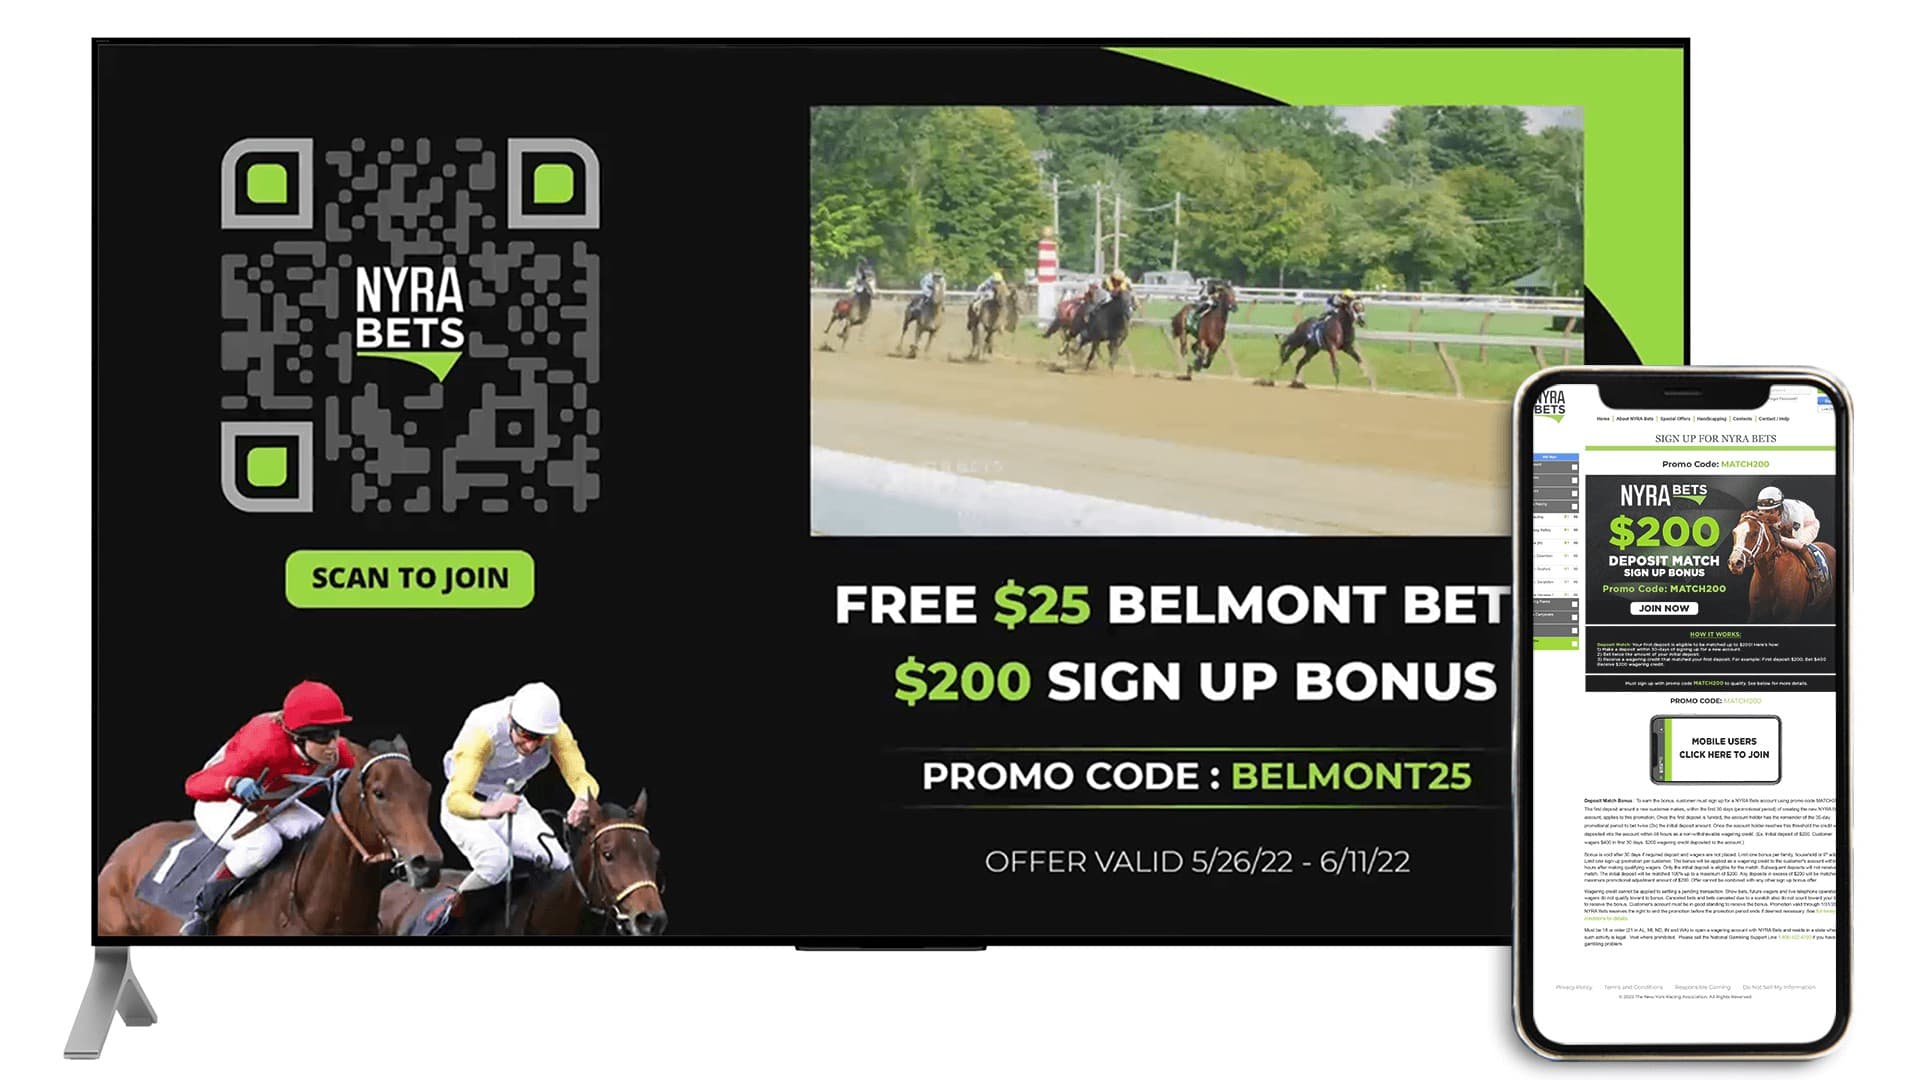 Galloping Towards Success: VDO.AI Empowered Nyra Bets With Engagement-Driven CTV Ads To Drum Up Consumer Interest For Belmont Stakes